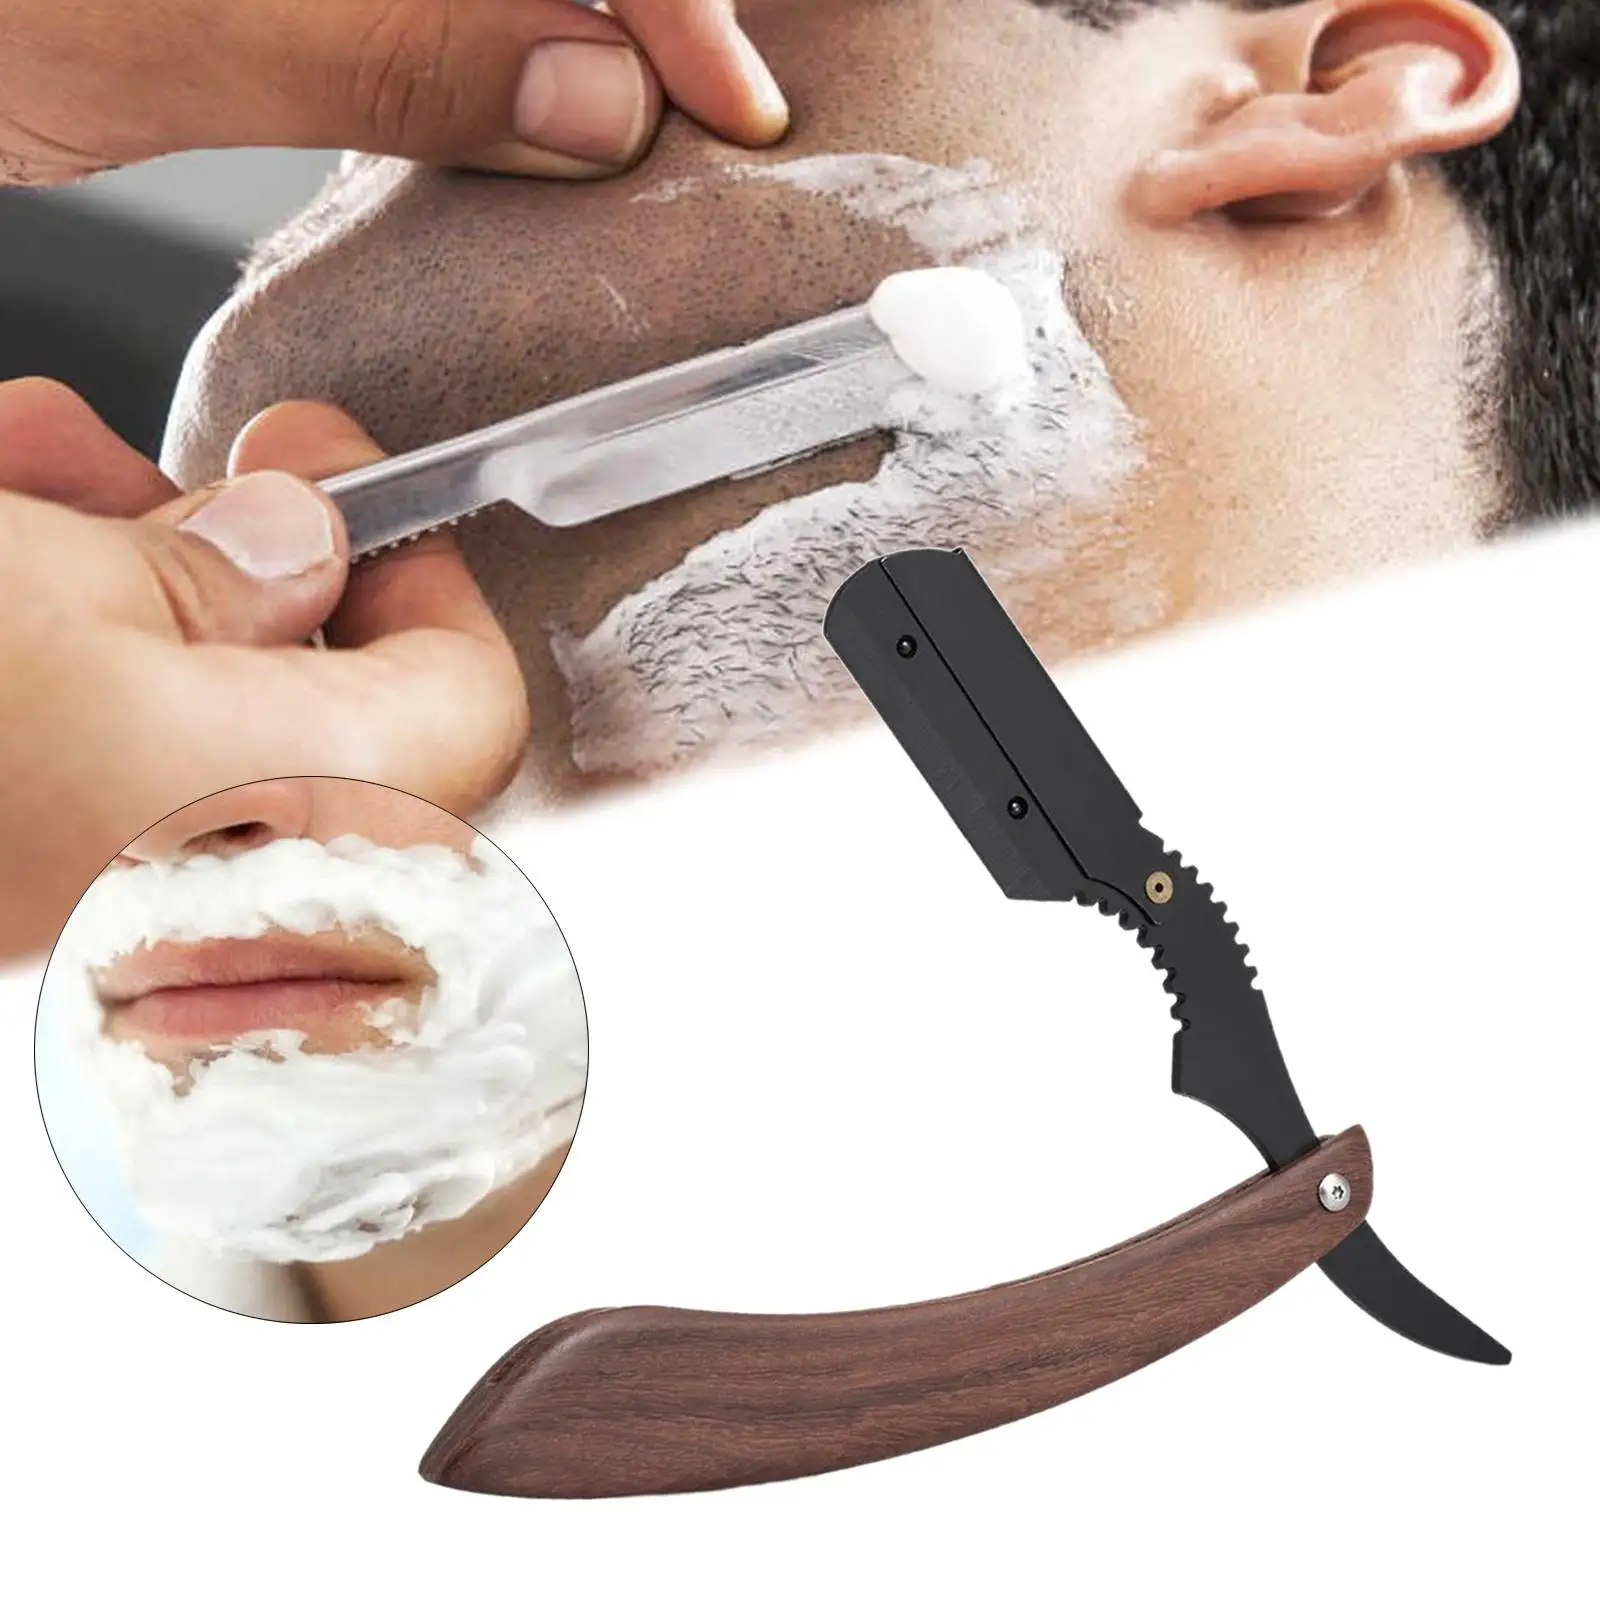 Folding   for  Handle Stainless Steel for Barbershop  Hair Remover Professional Durable Comfortable Grip